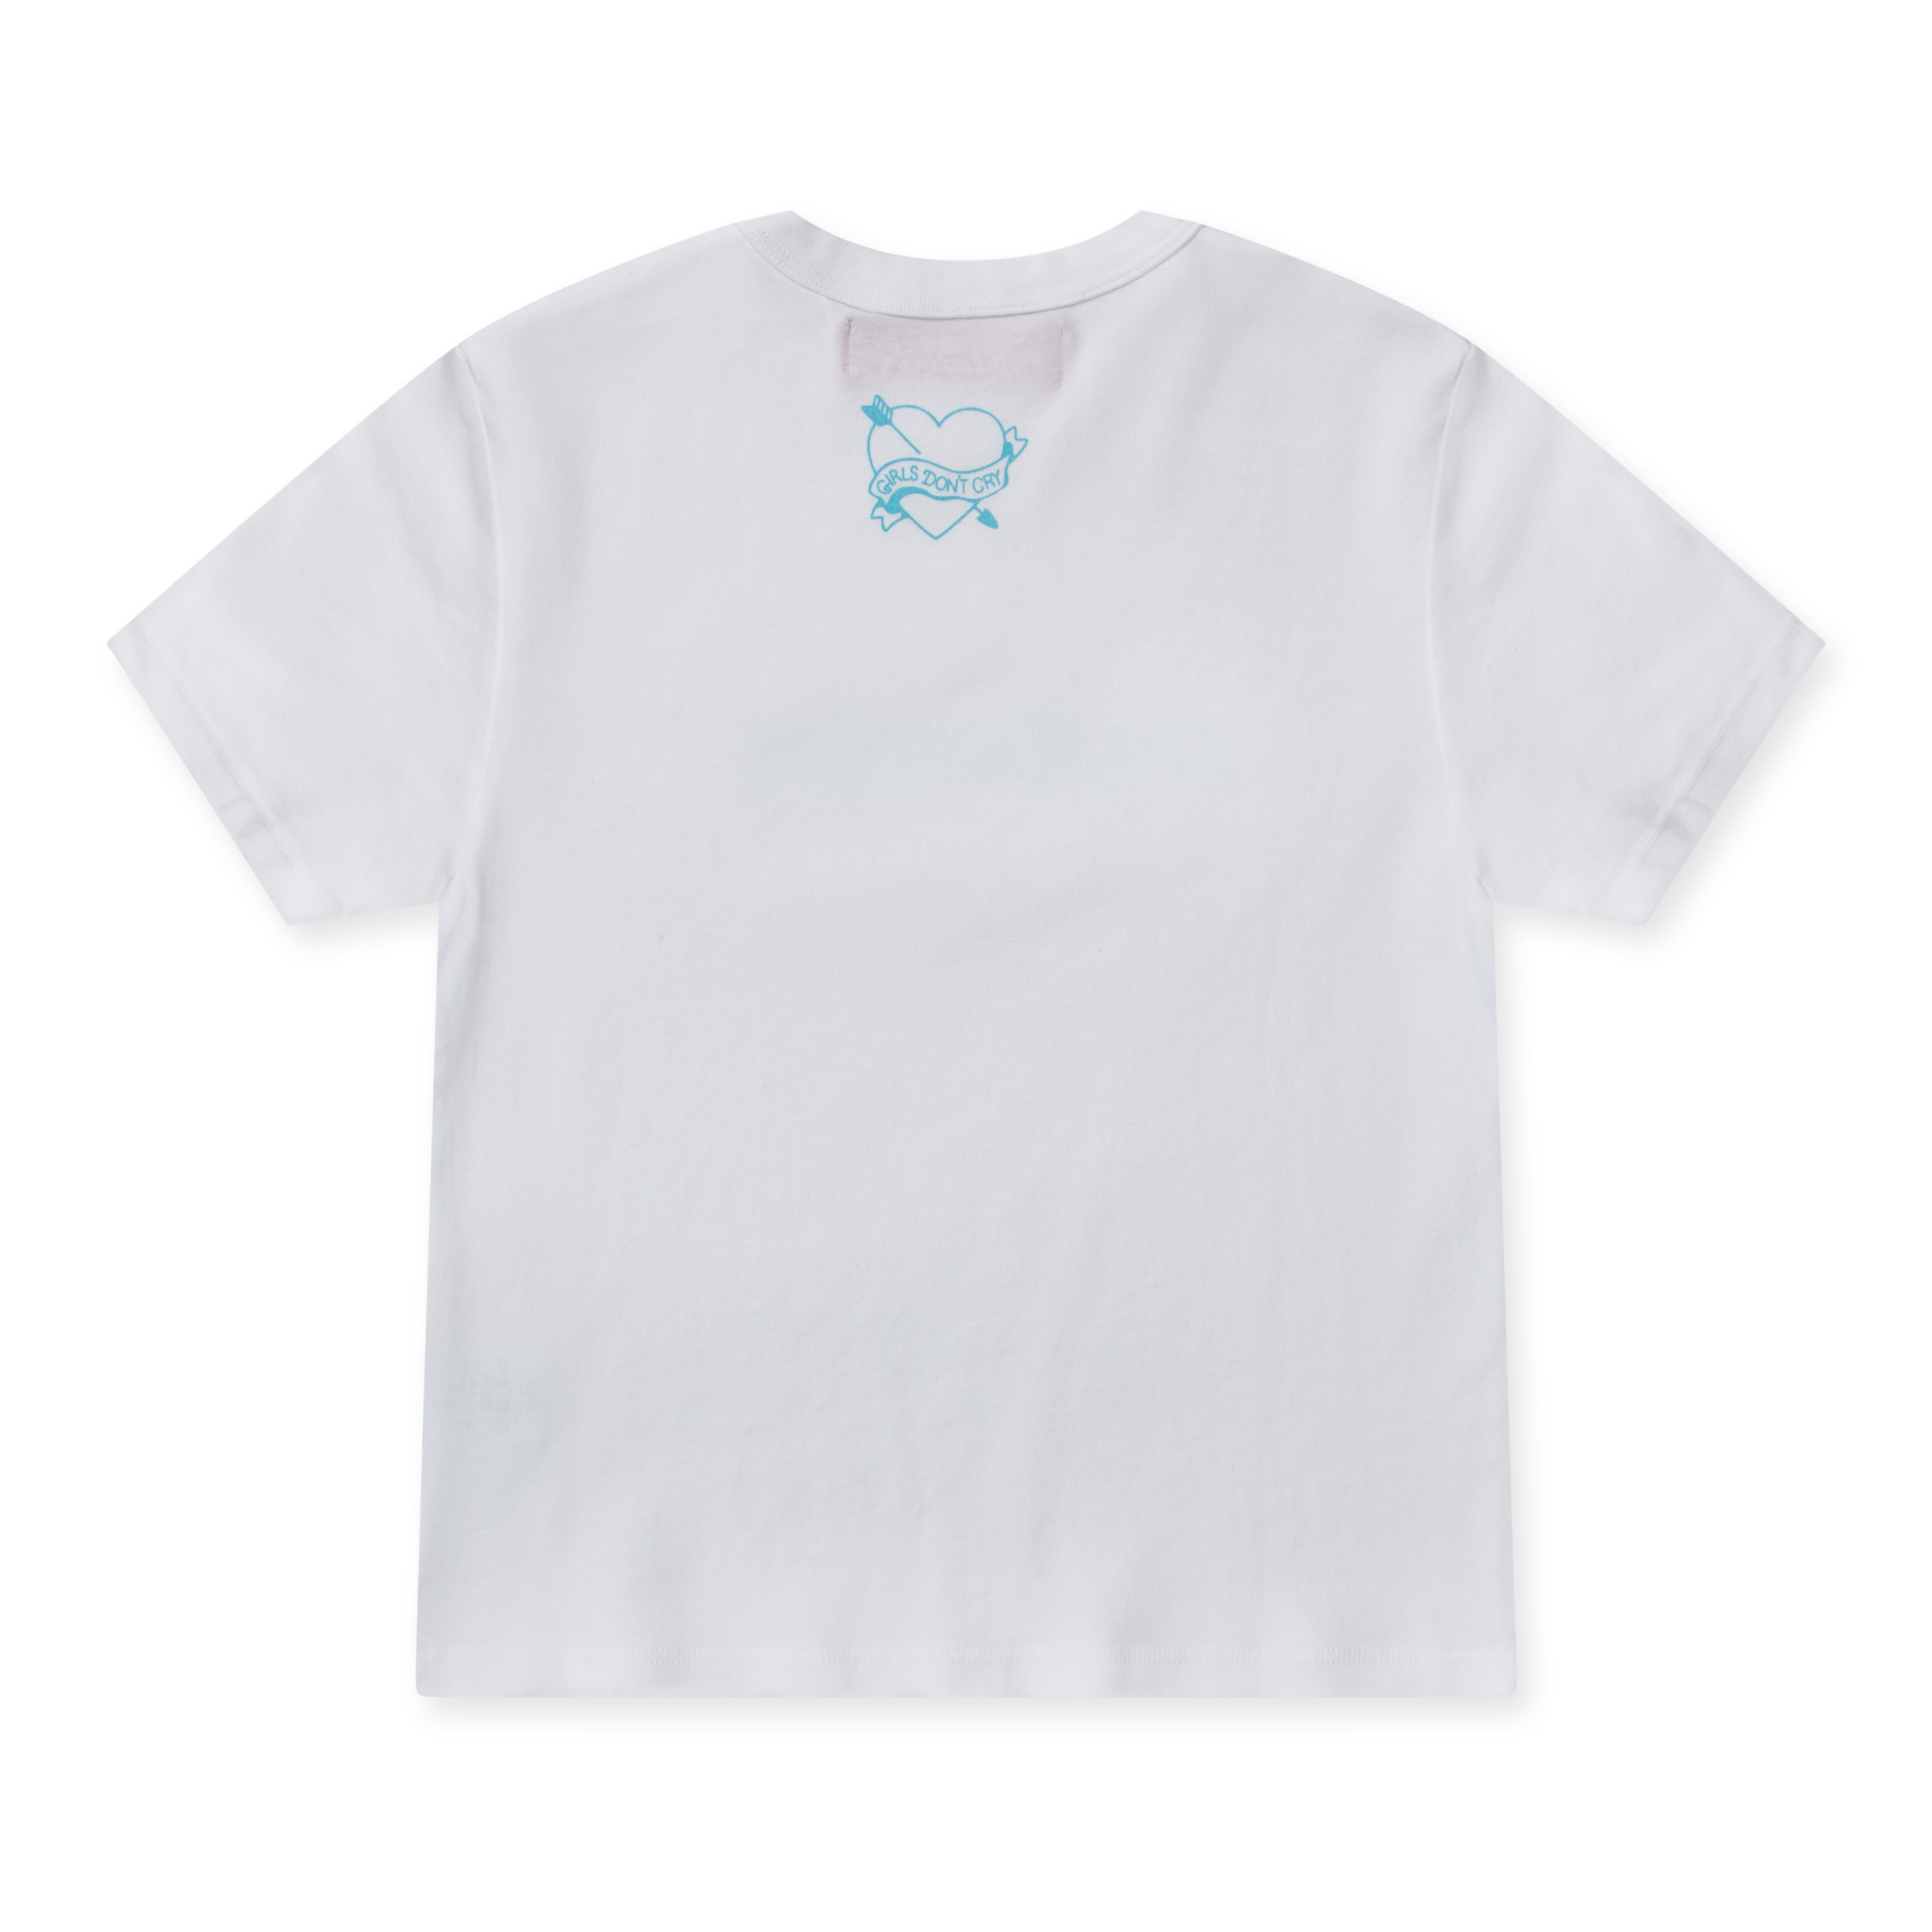 Girls Don’t Cry - GDC Wordmark Baby T-Shirt - (White)